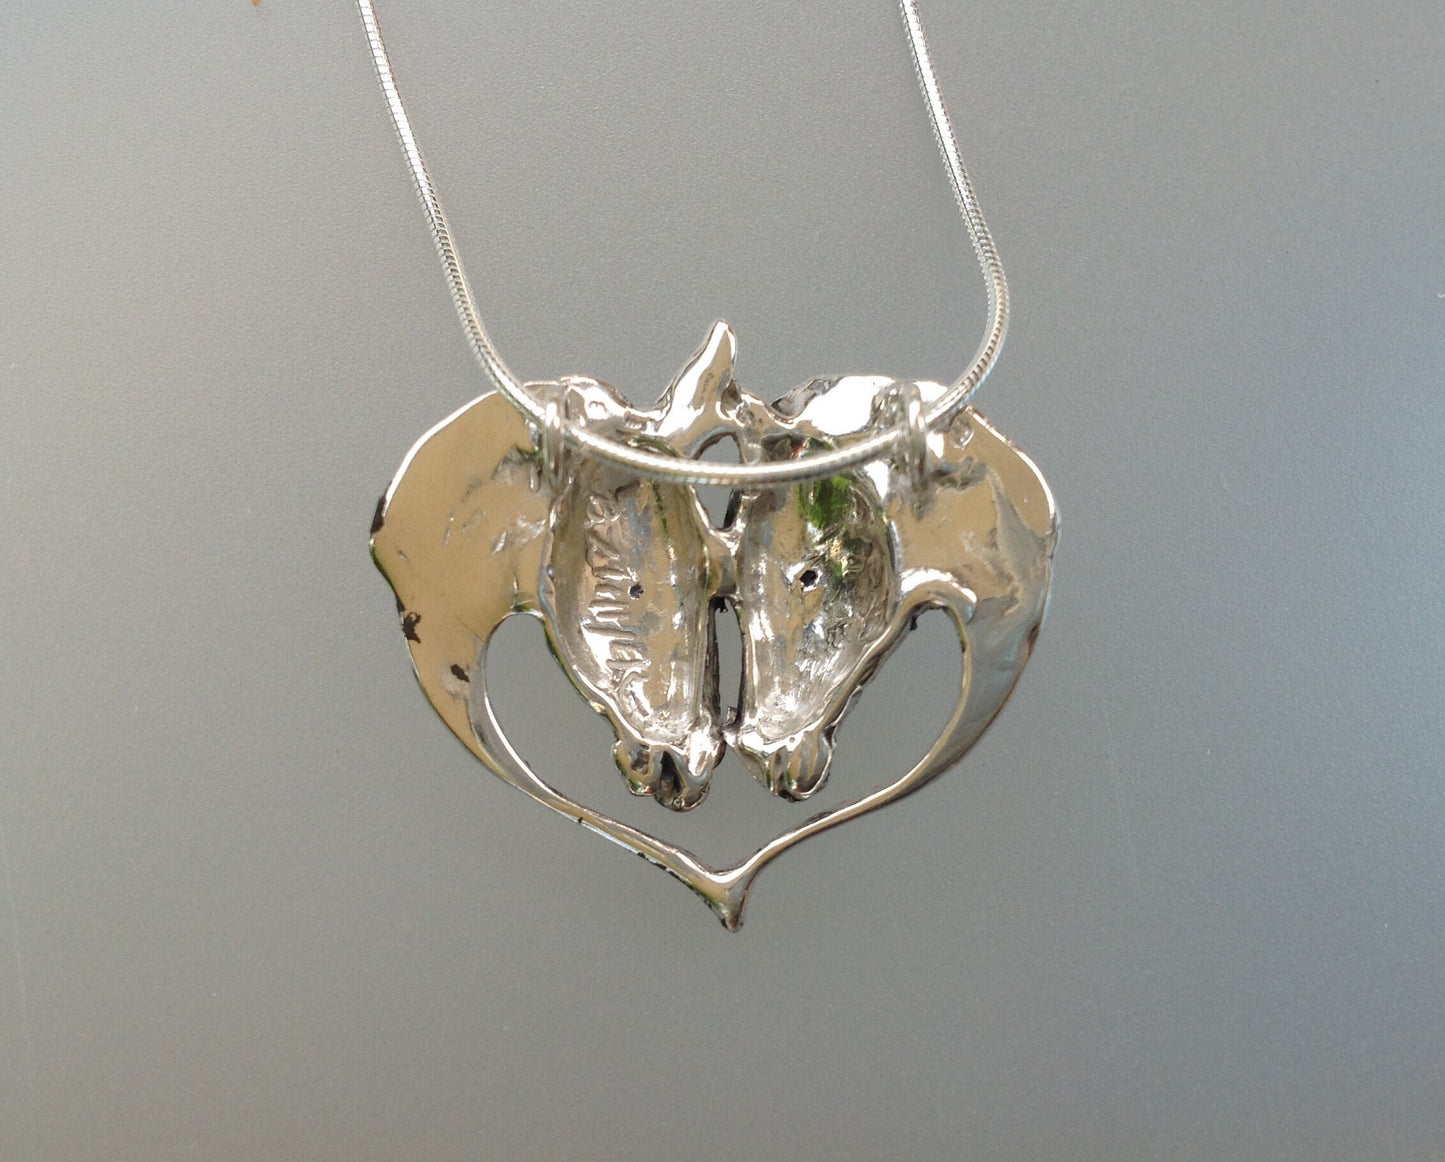 Donkey heart pendant  and chain STERLING SILVER  Forge Hill Sculpture  jewelry